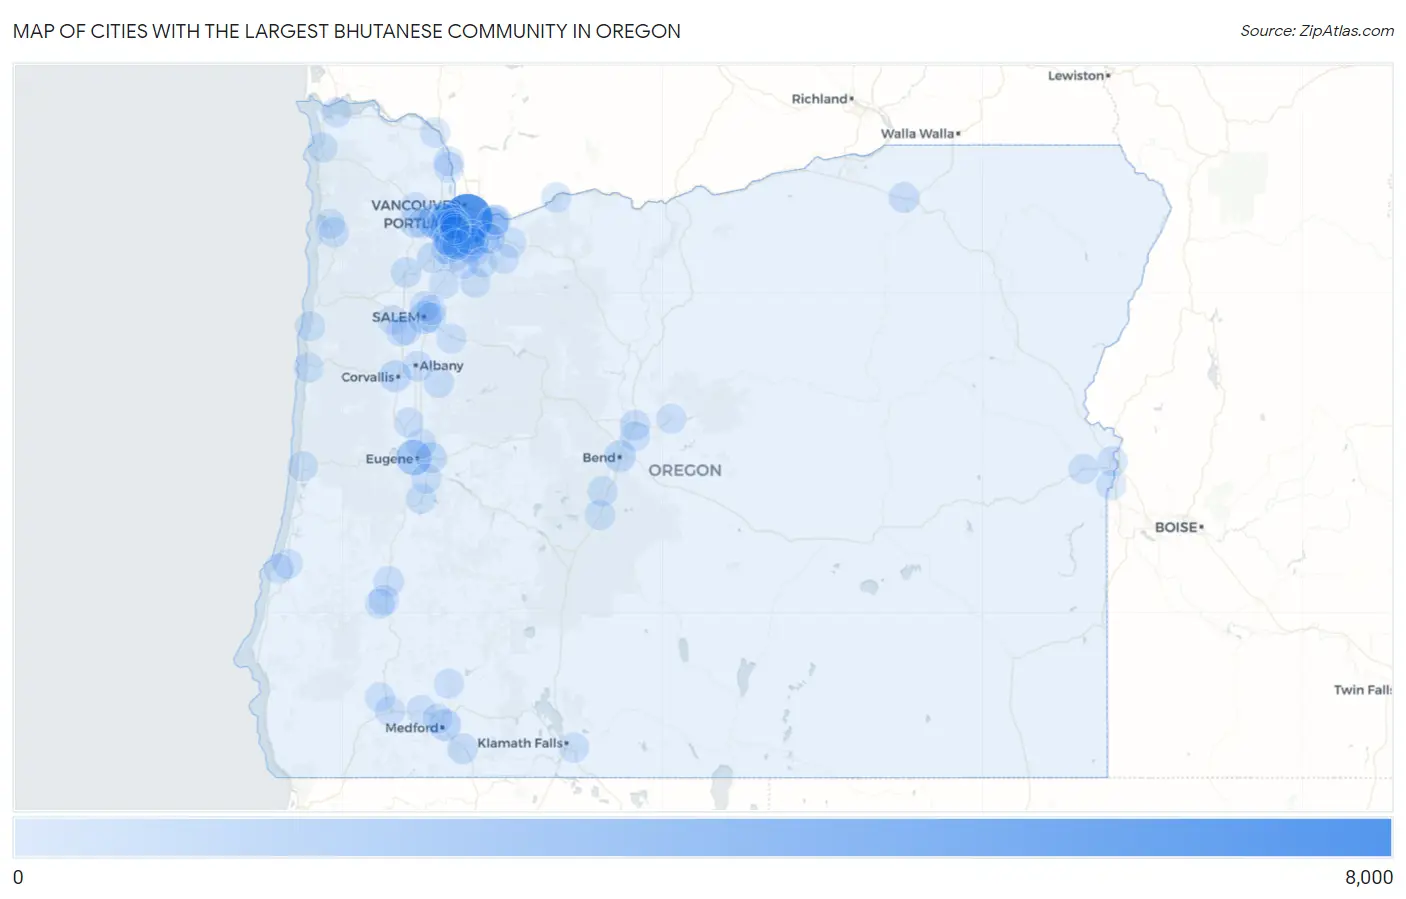 Cities with the Largest Bhutanese Community in Oregon Map